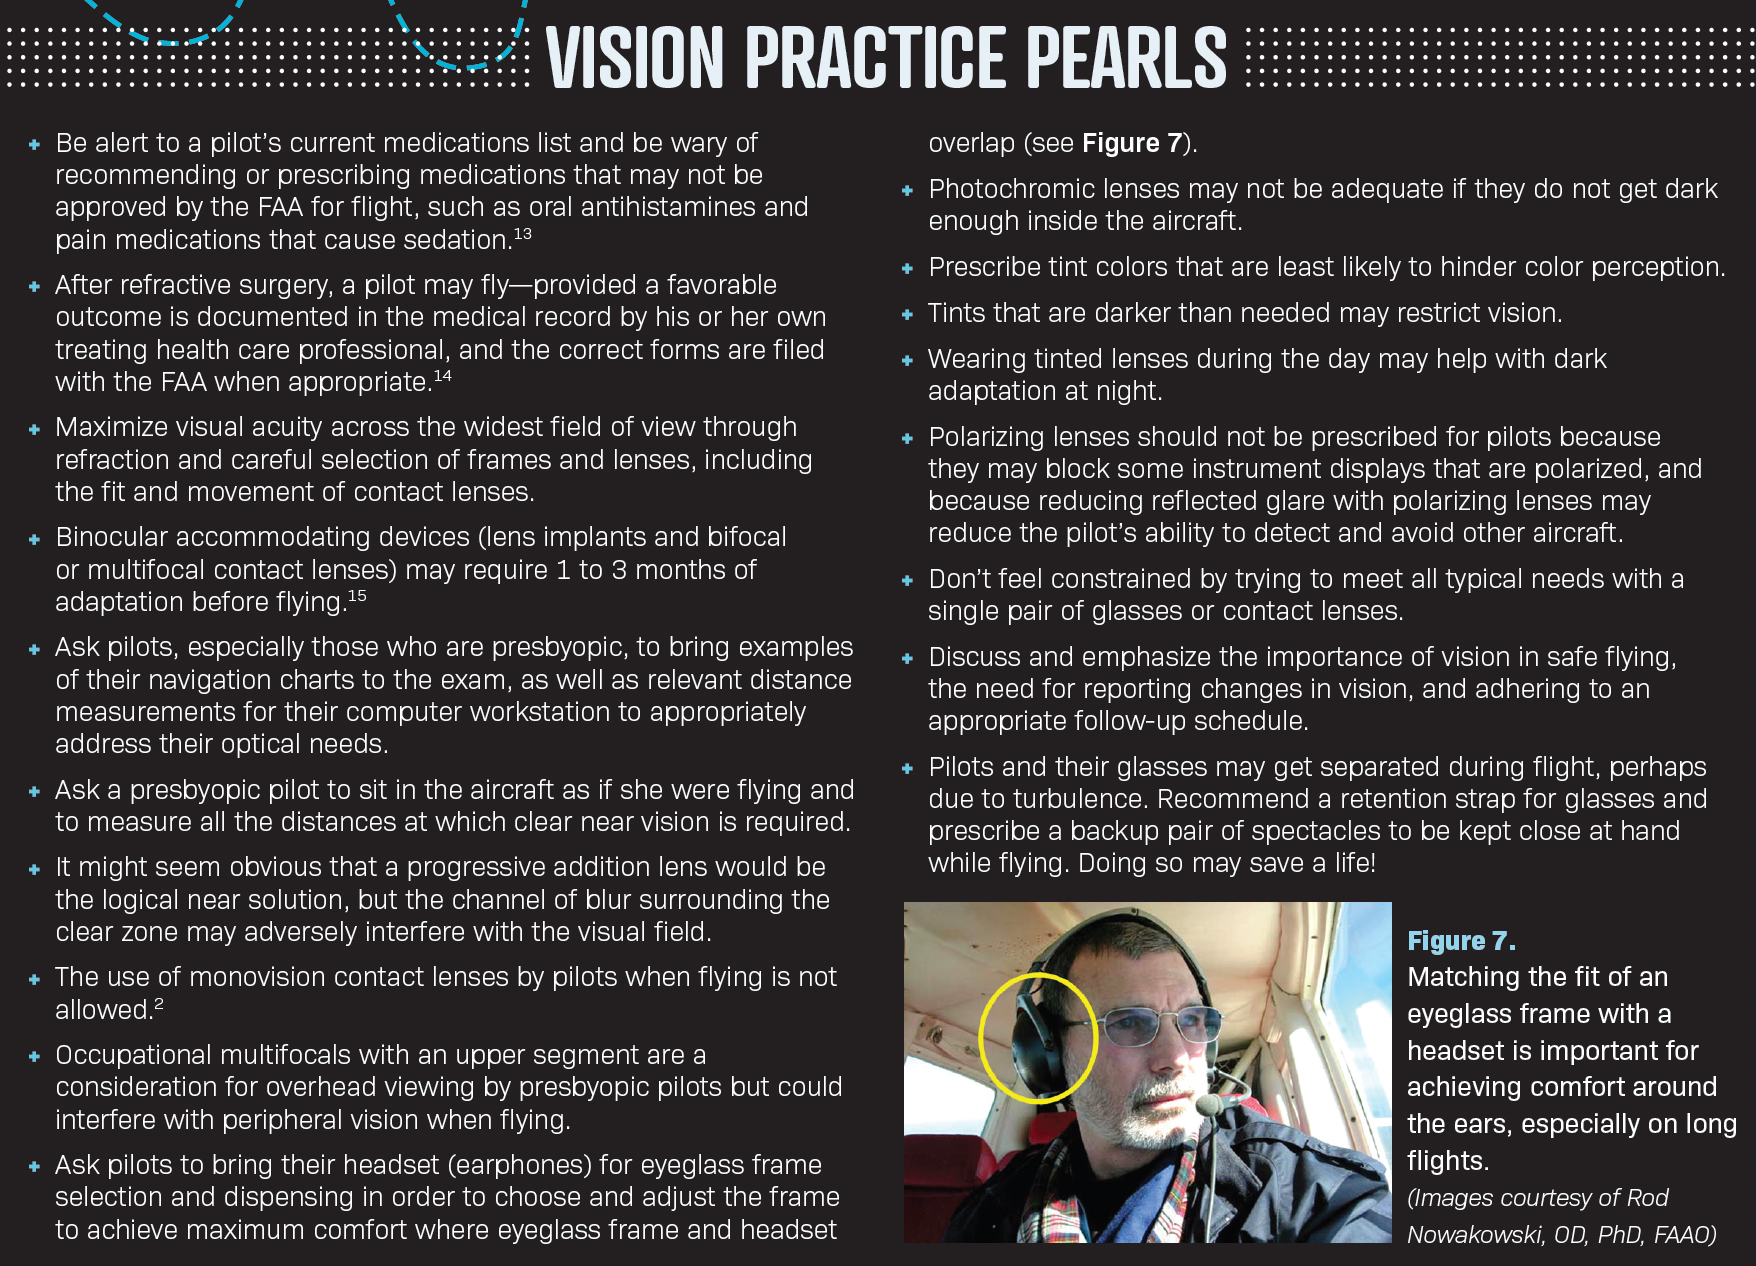 Vision practice pearls in aviation